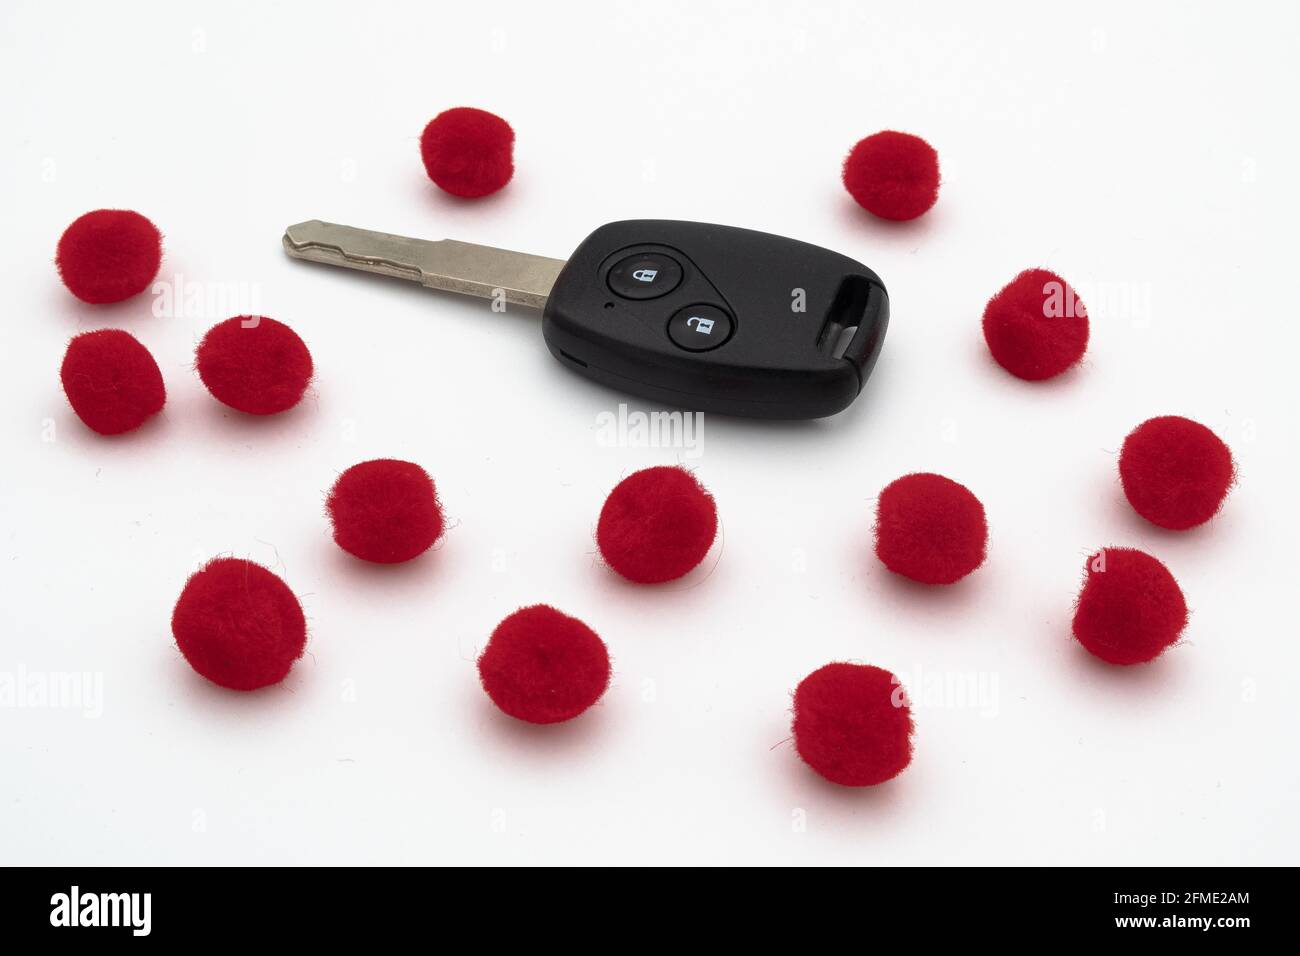 Zürich, Switzerland - November 4, 2020: Remote car key surrounded with red  balls Stock Photo - Alamy